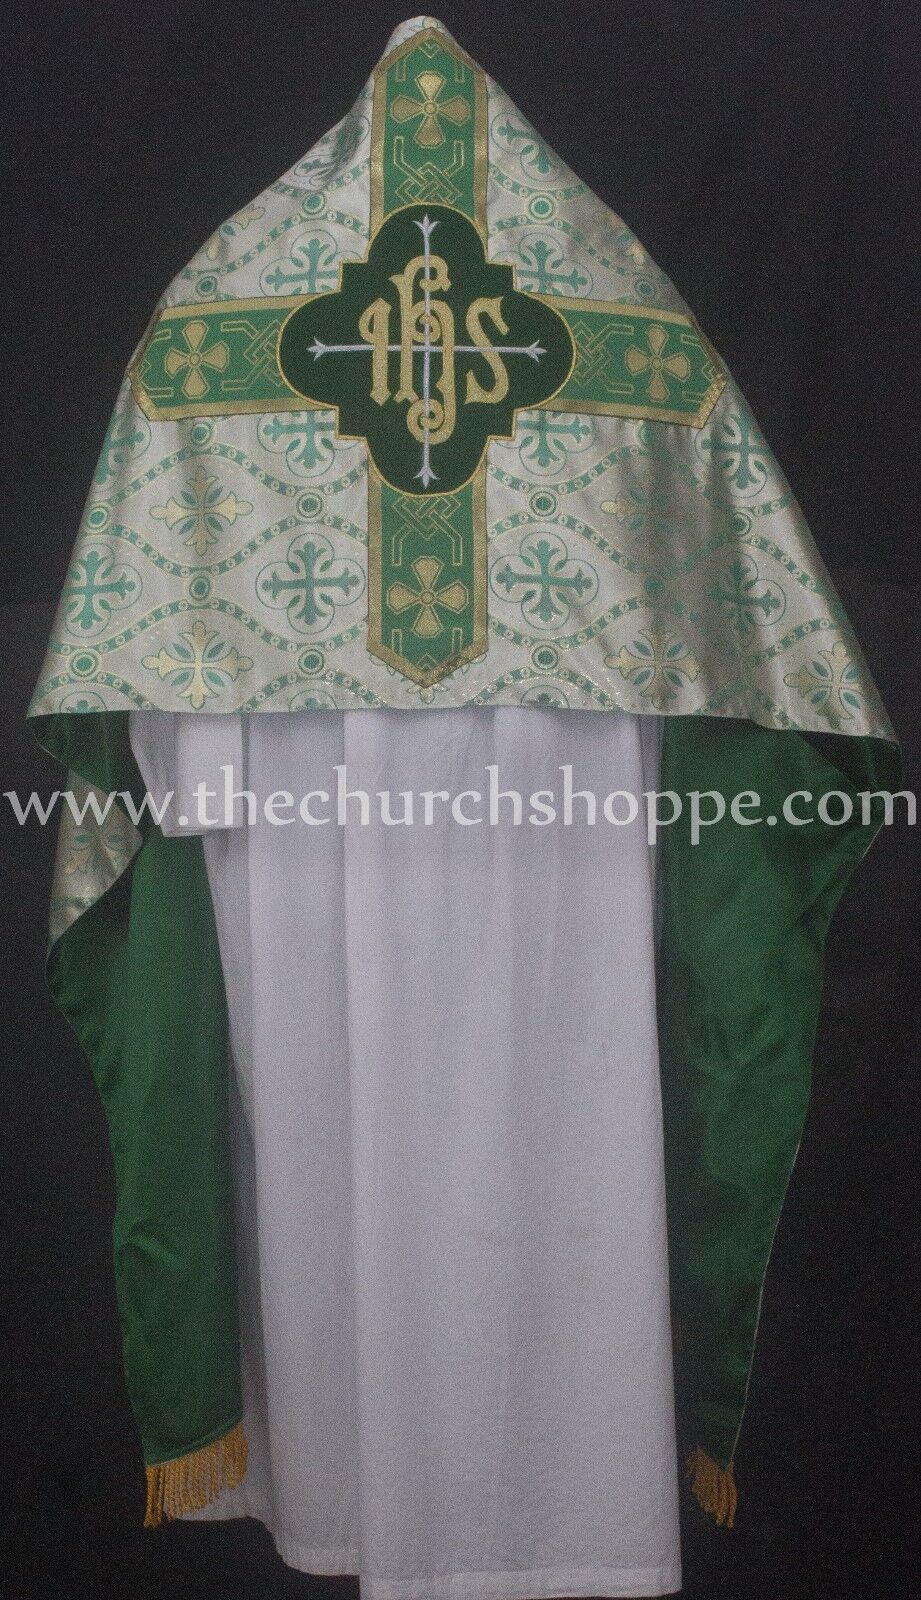 Metallic GREEN Humeral Veil with IHS embroidery voile huméral,velo omerale